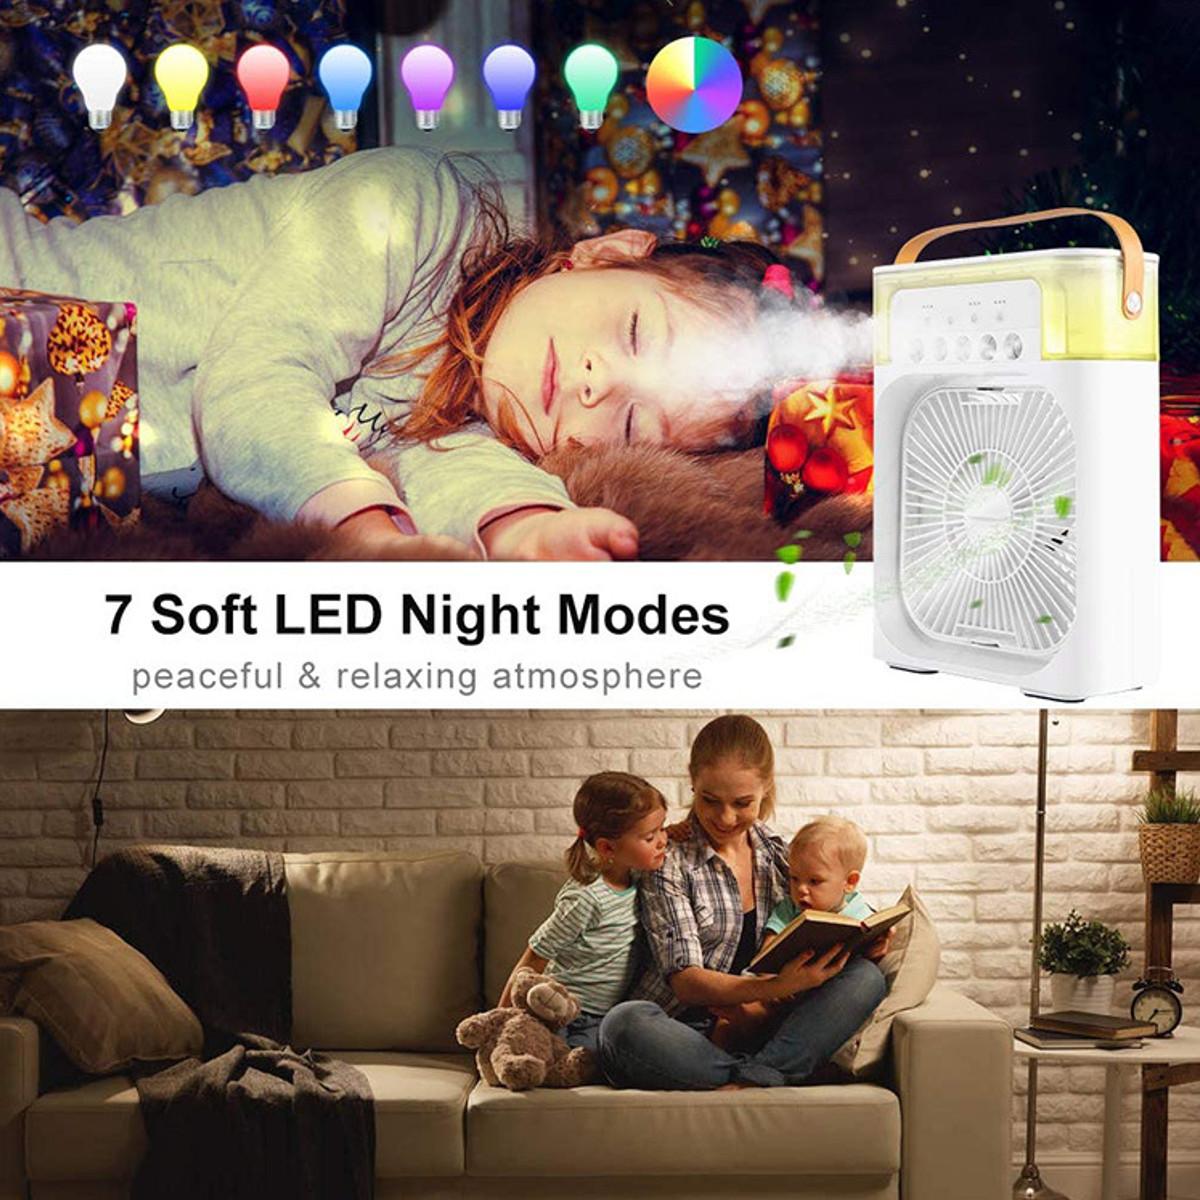 **NET**USB Portable Air Cooler Fan Air Conditioner Light Desktop Fan Air Cooler Humidifier Purify Bedroom with 7 Colors LED Night Light